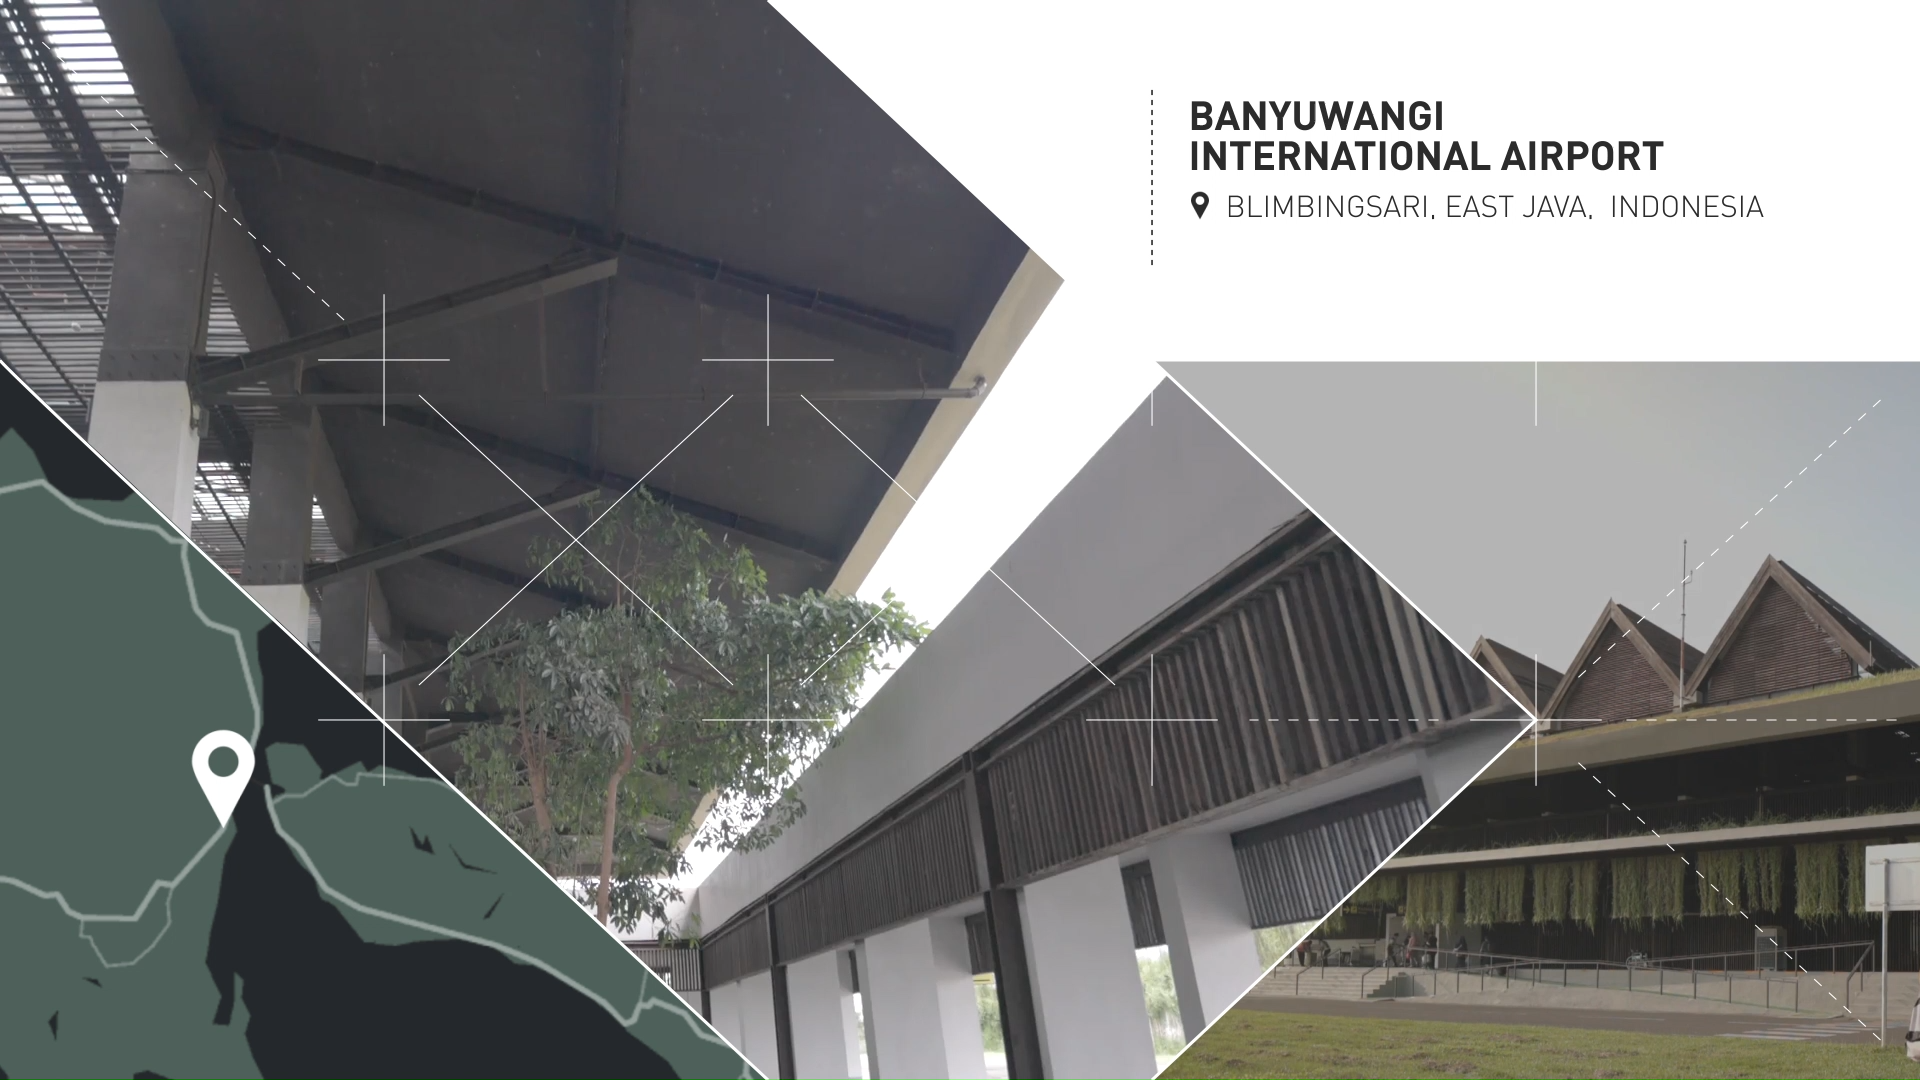 <p>Blimbingsari Airport,&nbsp;Banyuwangi, Indonesia, by andramatin: Serving more than 1,100 domestic passengers per day, the airport’s roofs indicate a clear division between departure and arrival halls.</p>